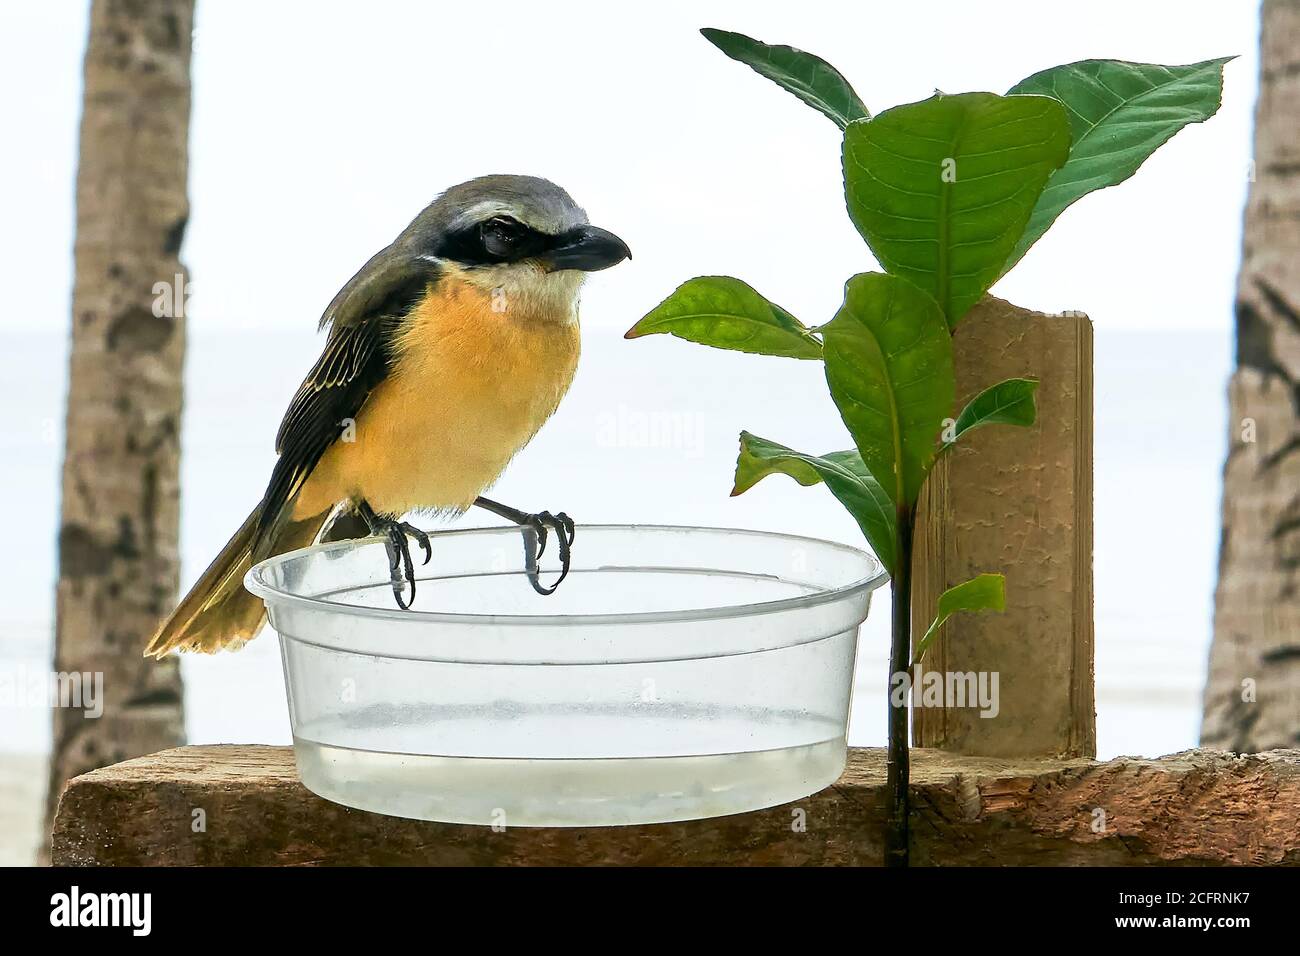 Brown shrike bird, Lanius cristatus, with a yellow front feathering, is sitting on a plastic container for drinking water, Philippines, Asia Stock Photo